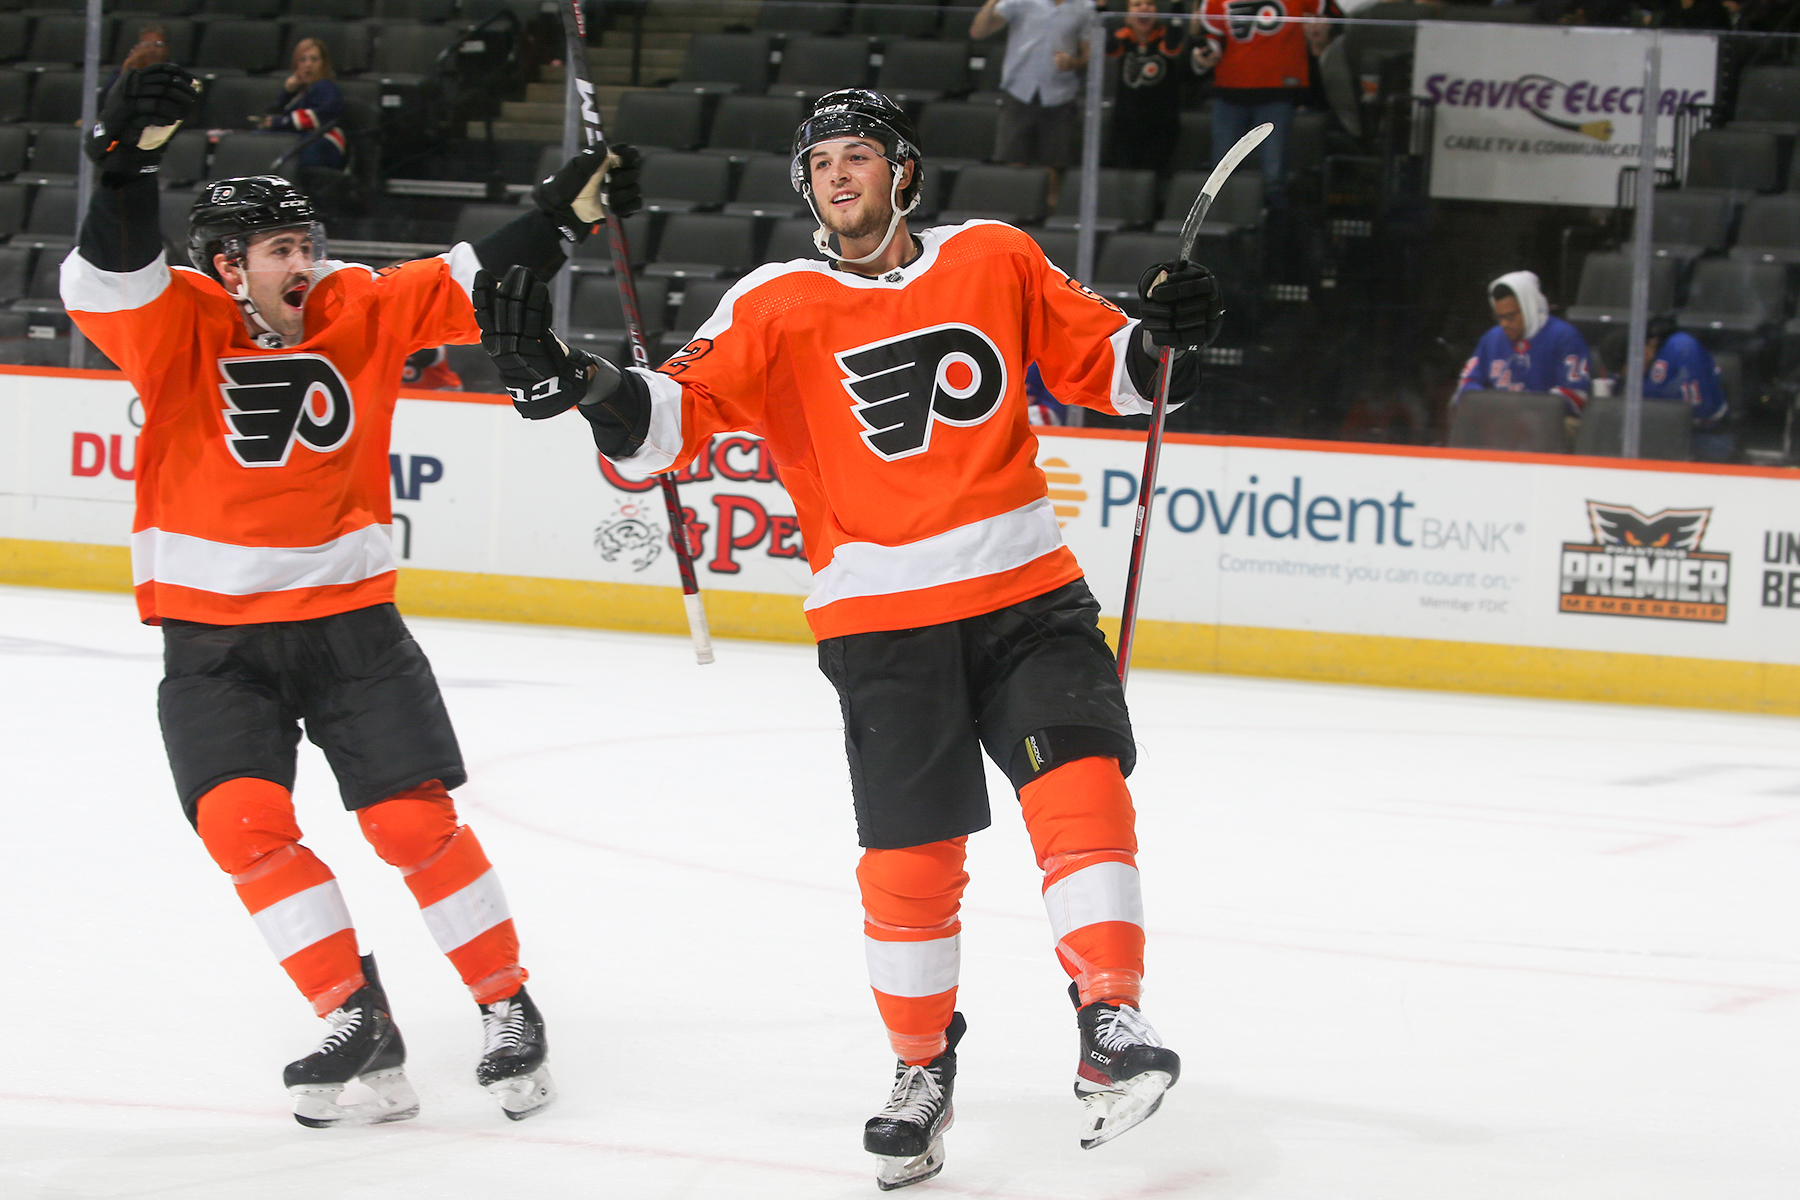 Key takeaways after Flyers take the ice in rookie game vs. Rangers